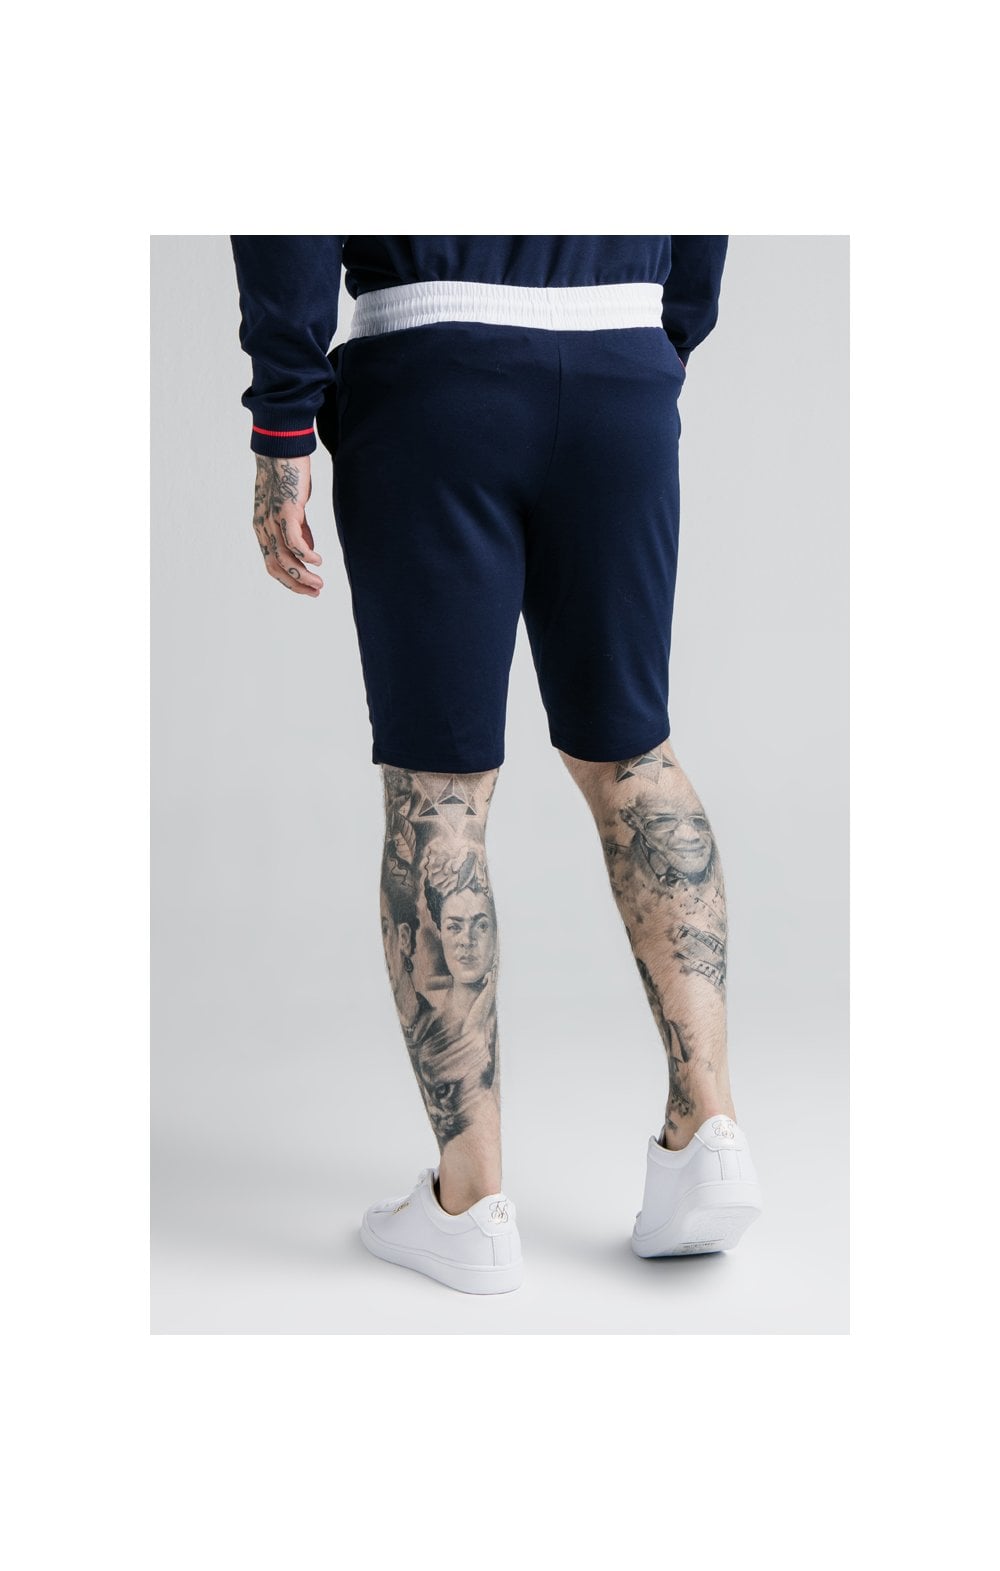 Load image into Gallery viewer, SikSilk Retro Sport Shorts - Navy (2)